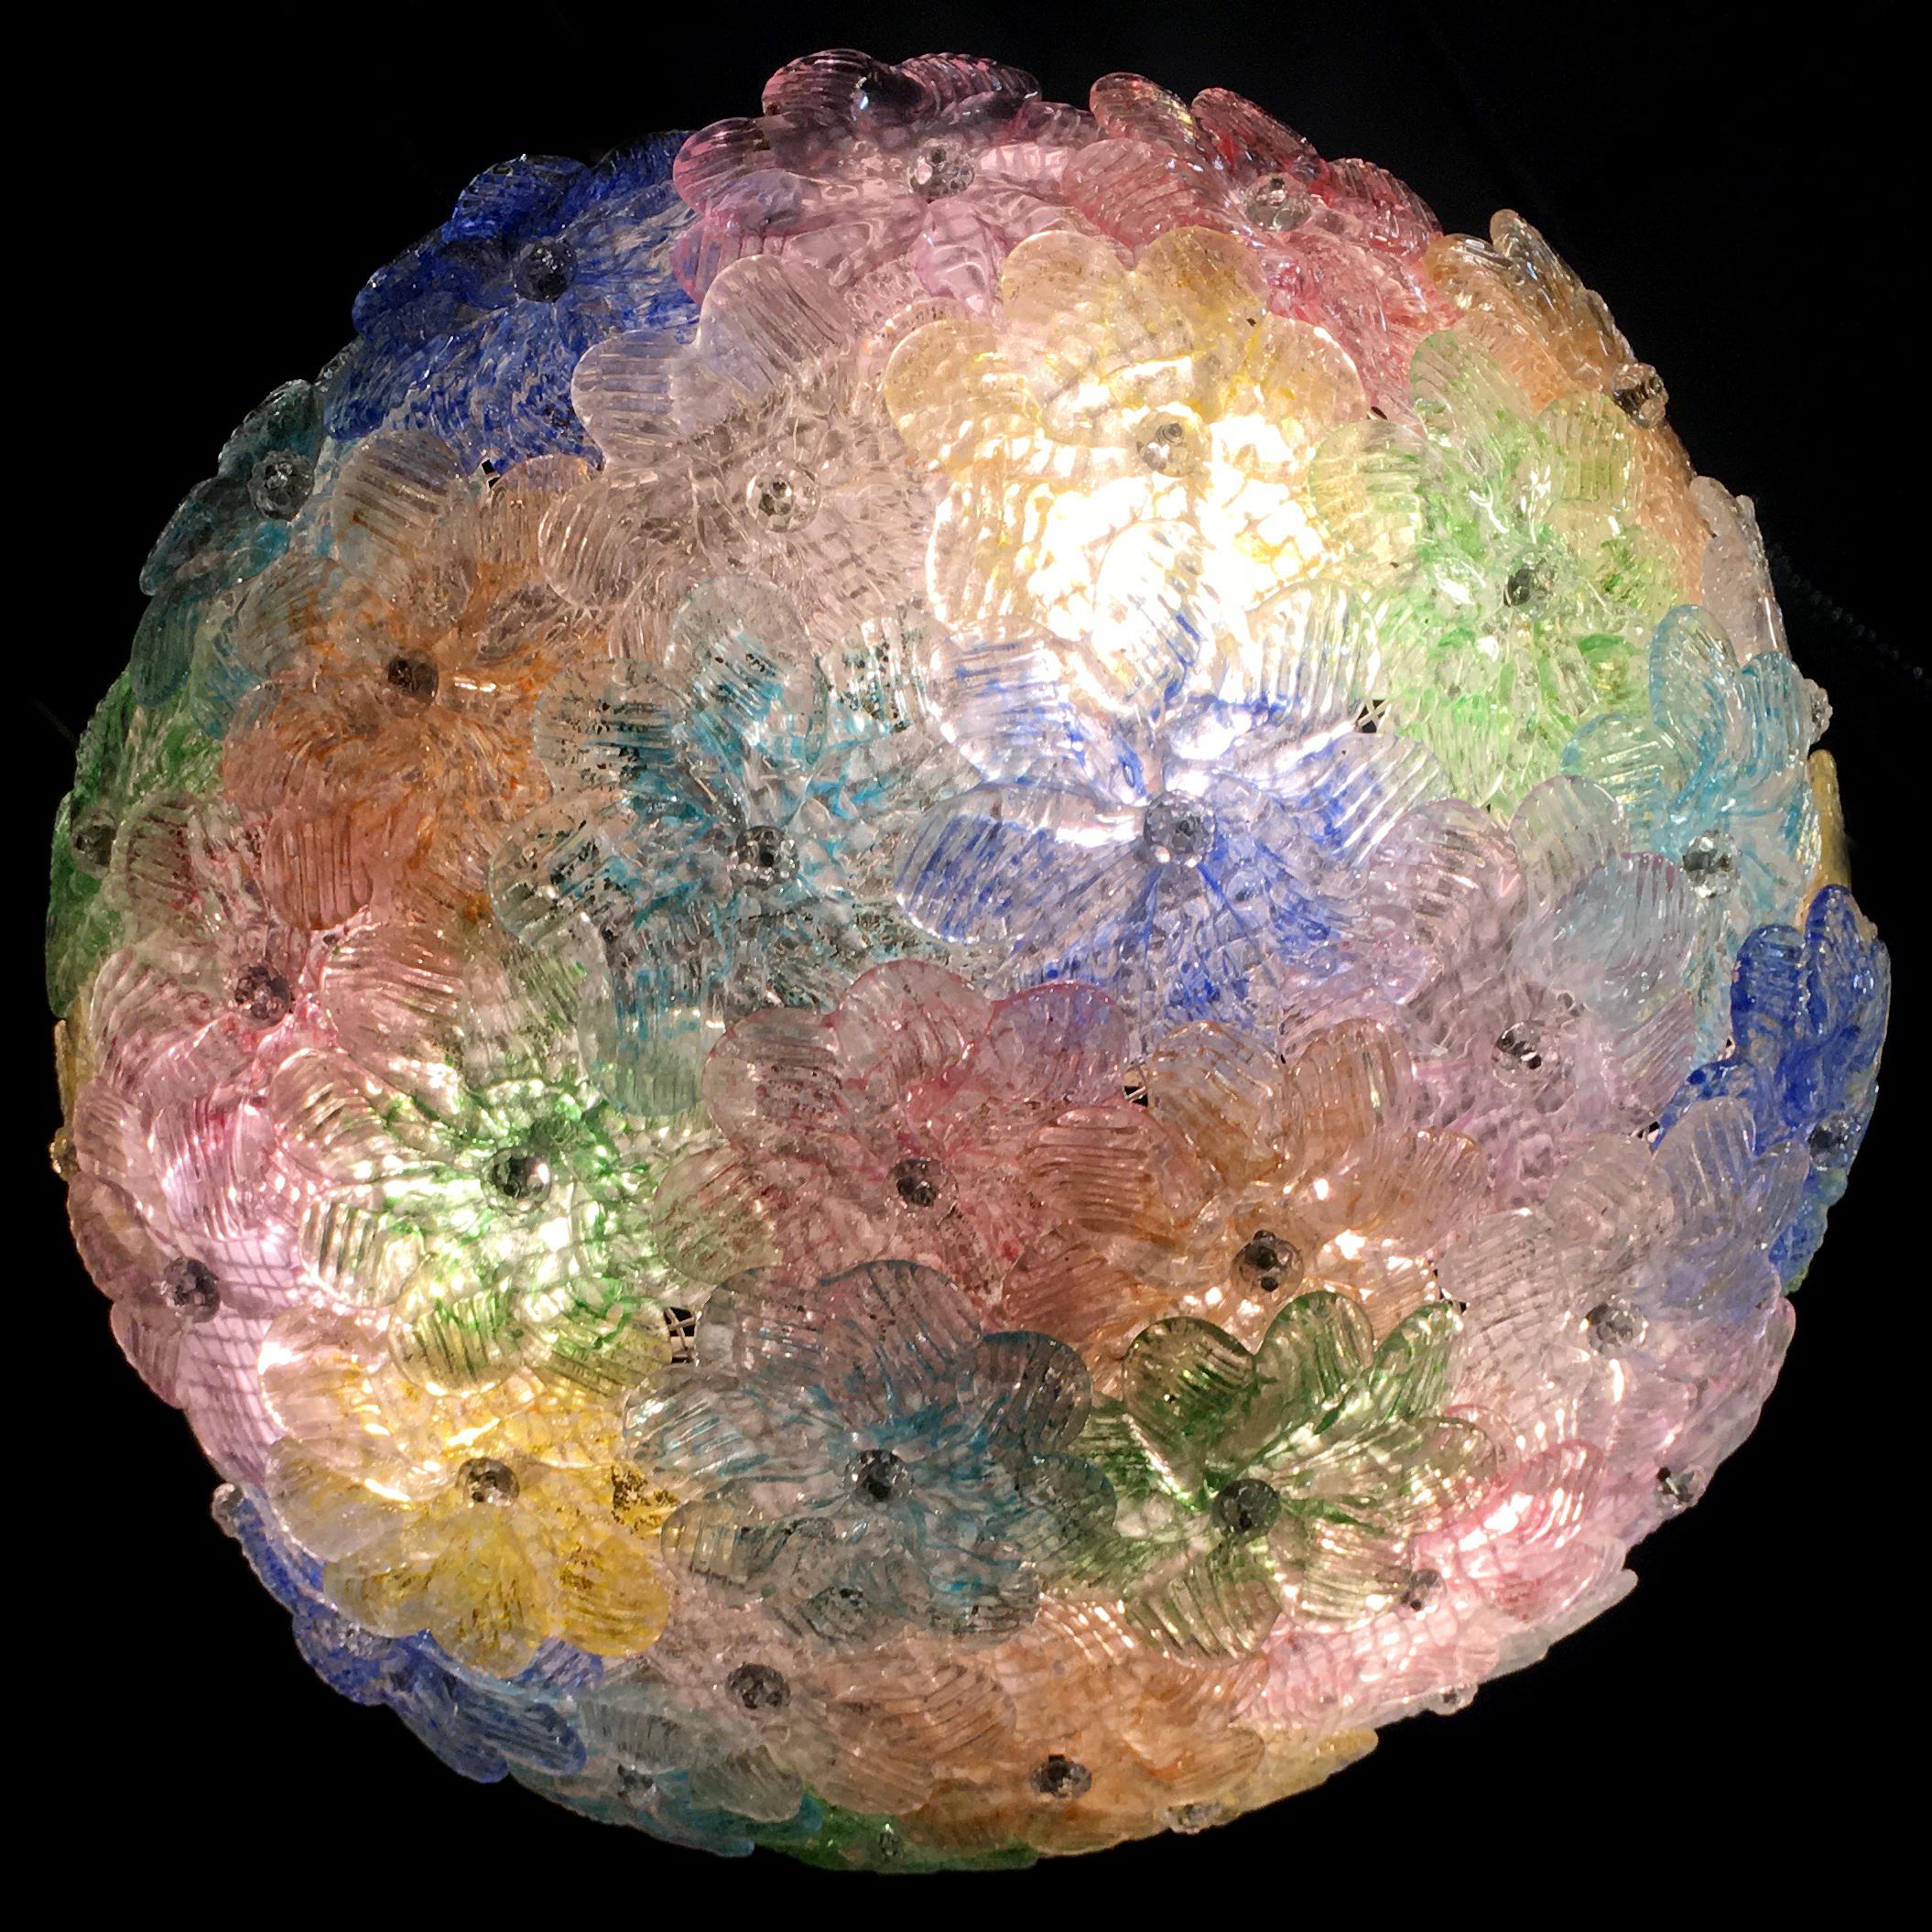 Seguso Venetian glass flowers basket ceiling.
The ceiling lamp is made of dozens of small multicolored roses in precious Murano glass.
Measures: Diameter 33 cm
Height 47 cm.